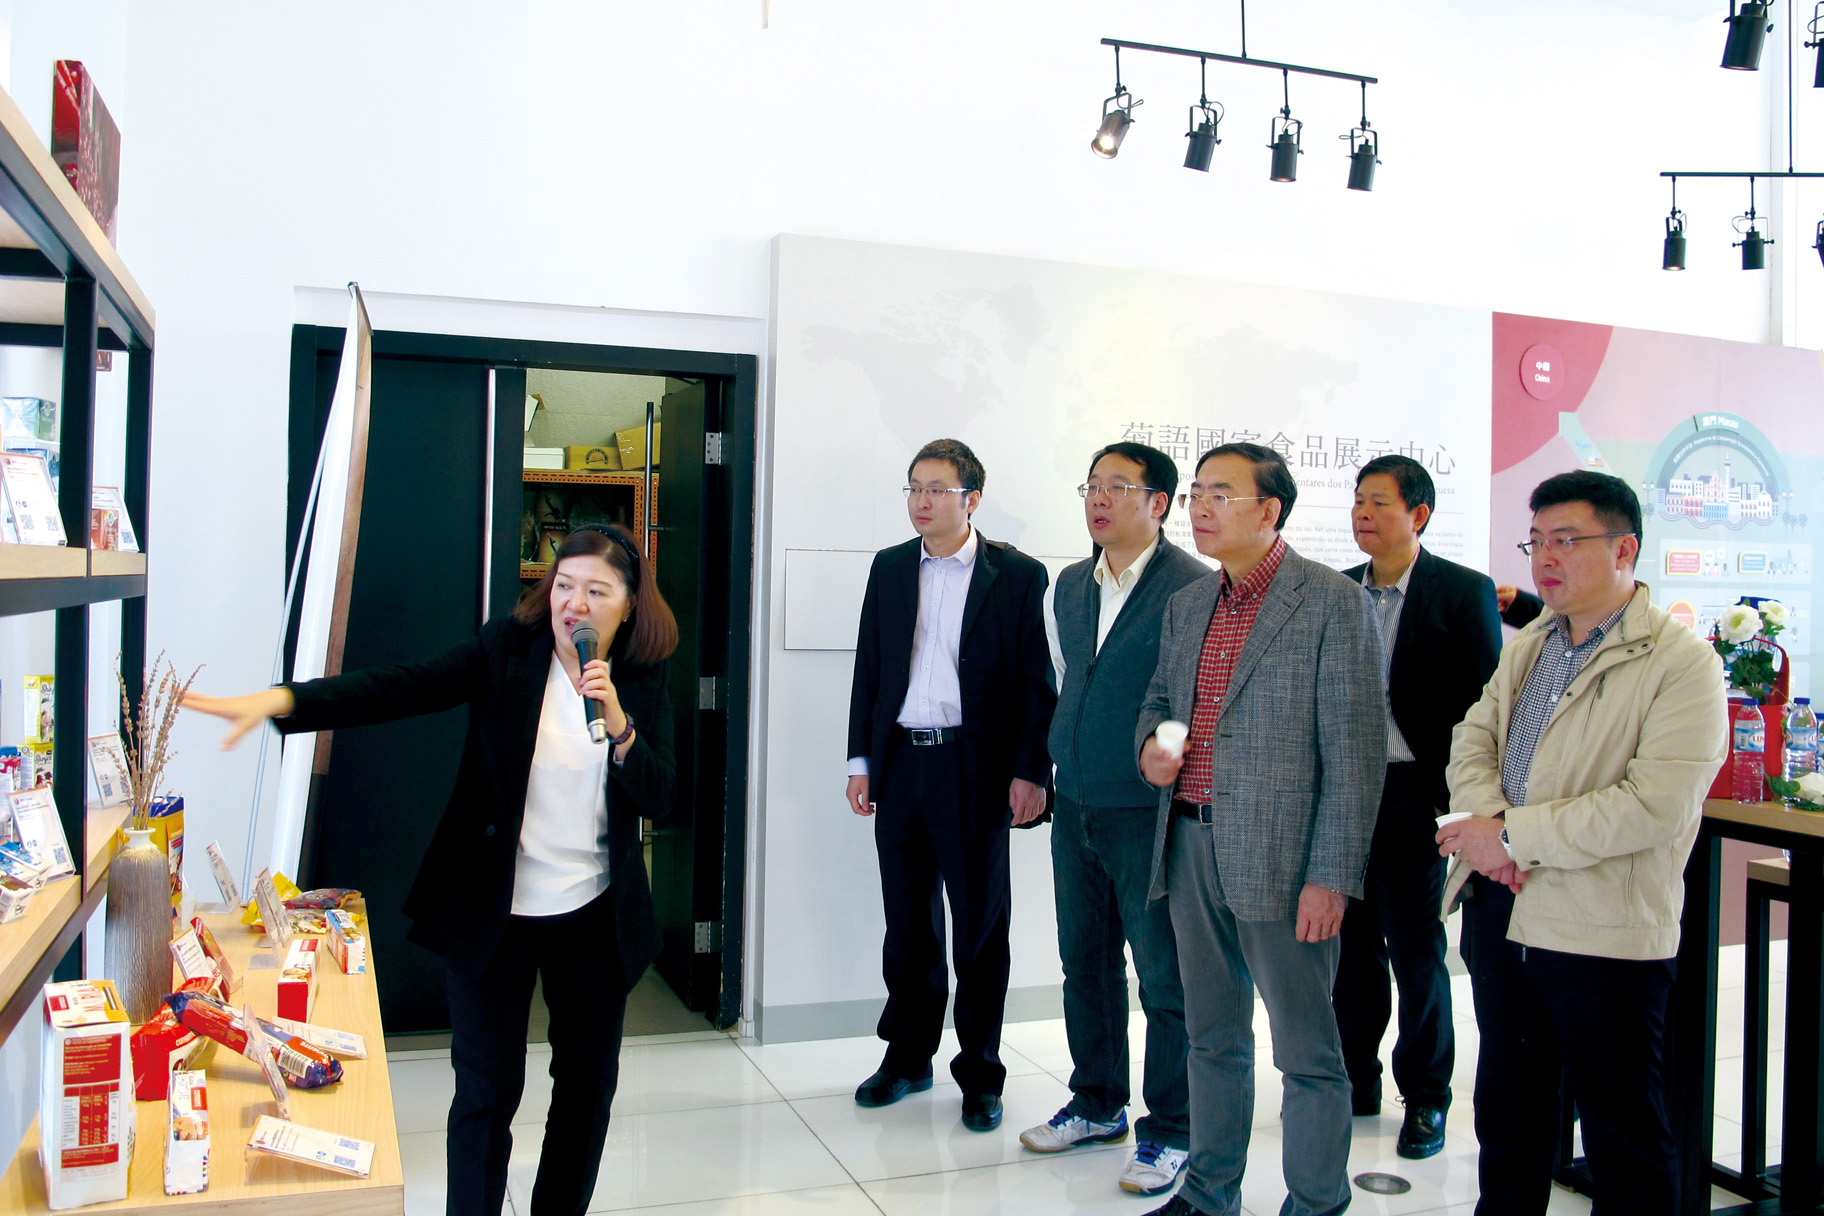 A delegation from the Development, Planning and Research Group of the Great Bay Area of Guangdong, Hong Kong and Macau visits the Portuguese-speaking Countries Food Products Exhibition Centre <br>(10 December 2016)